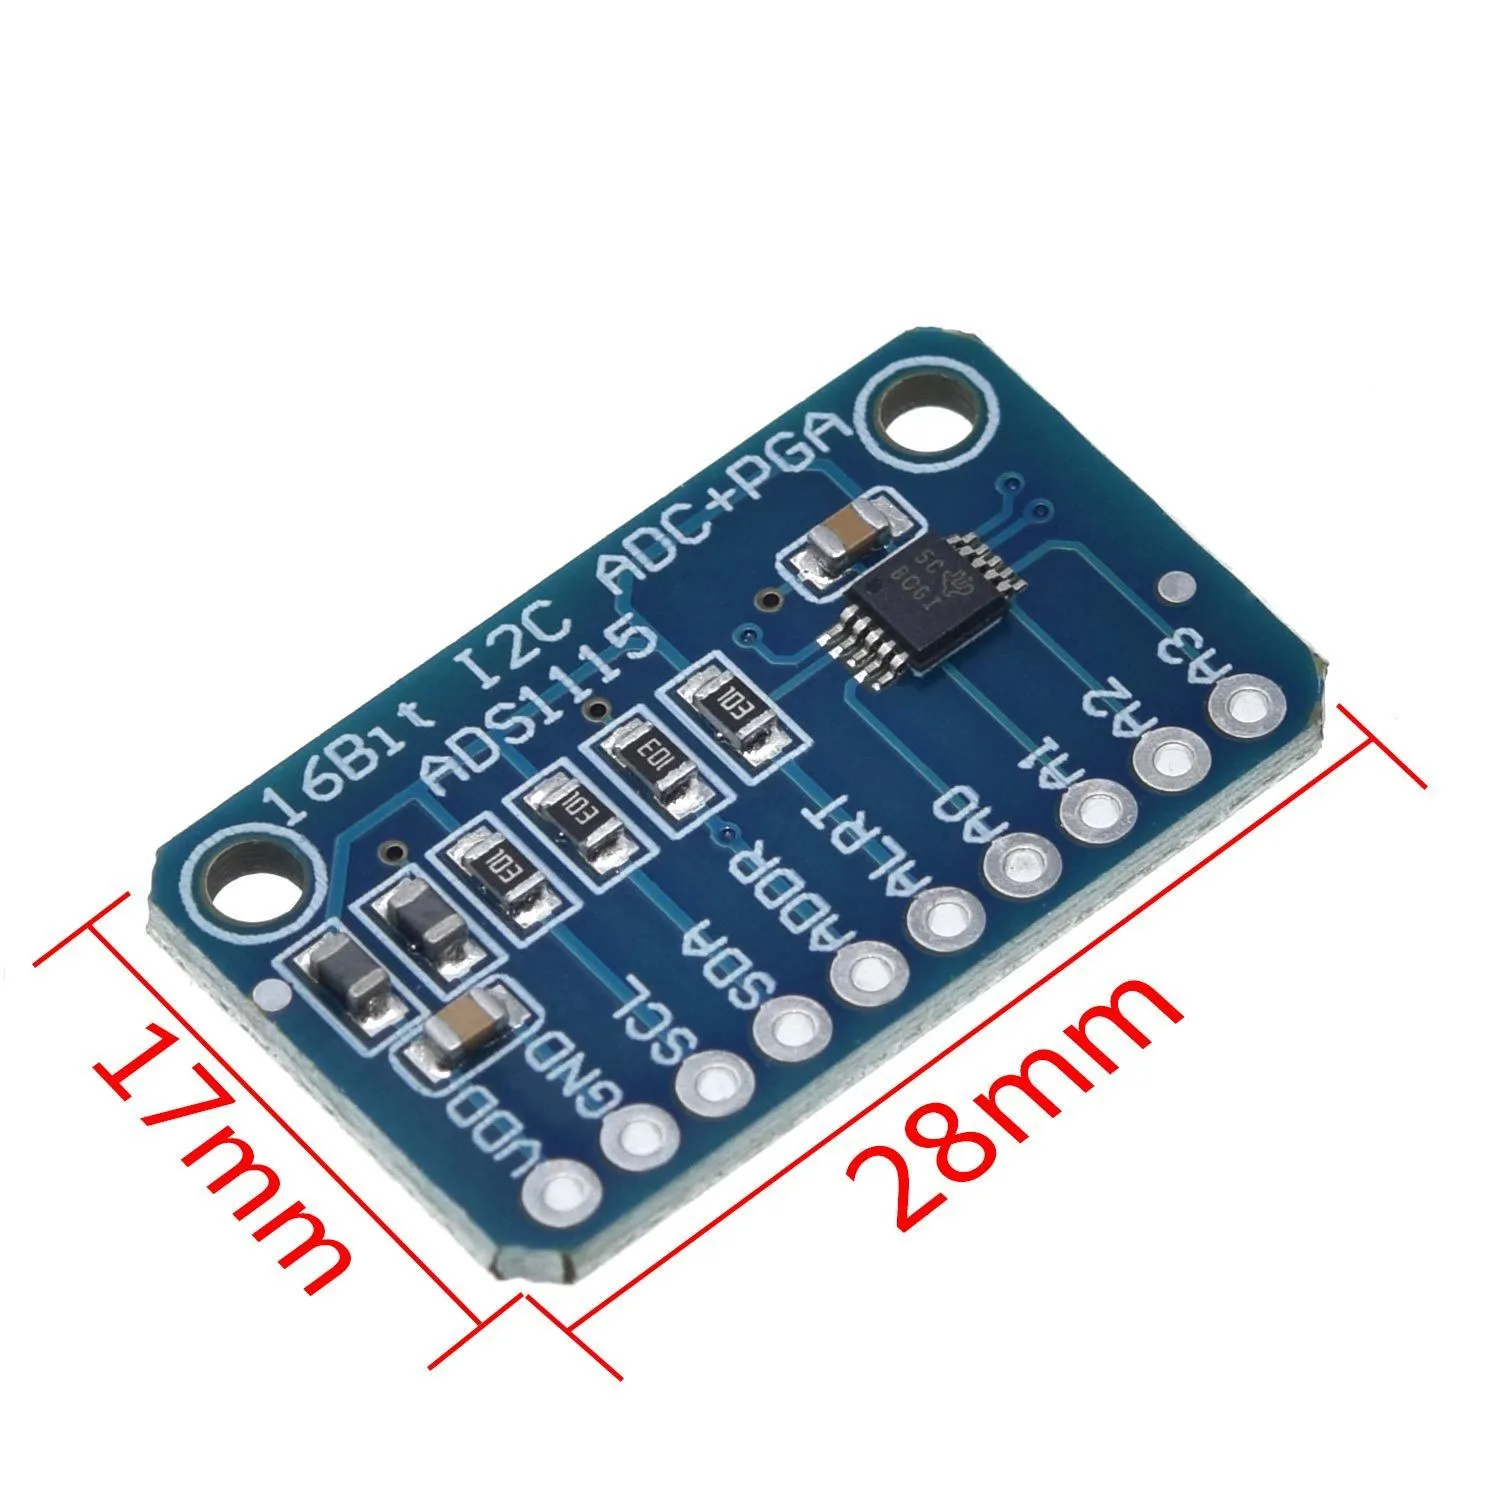 ADC I2C 16 Bit ADS1115 4 Channels module with Pro RPi Gain Amplifier for Arduino